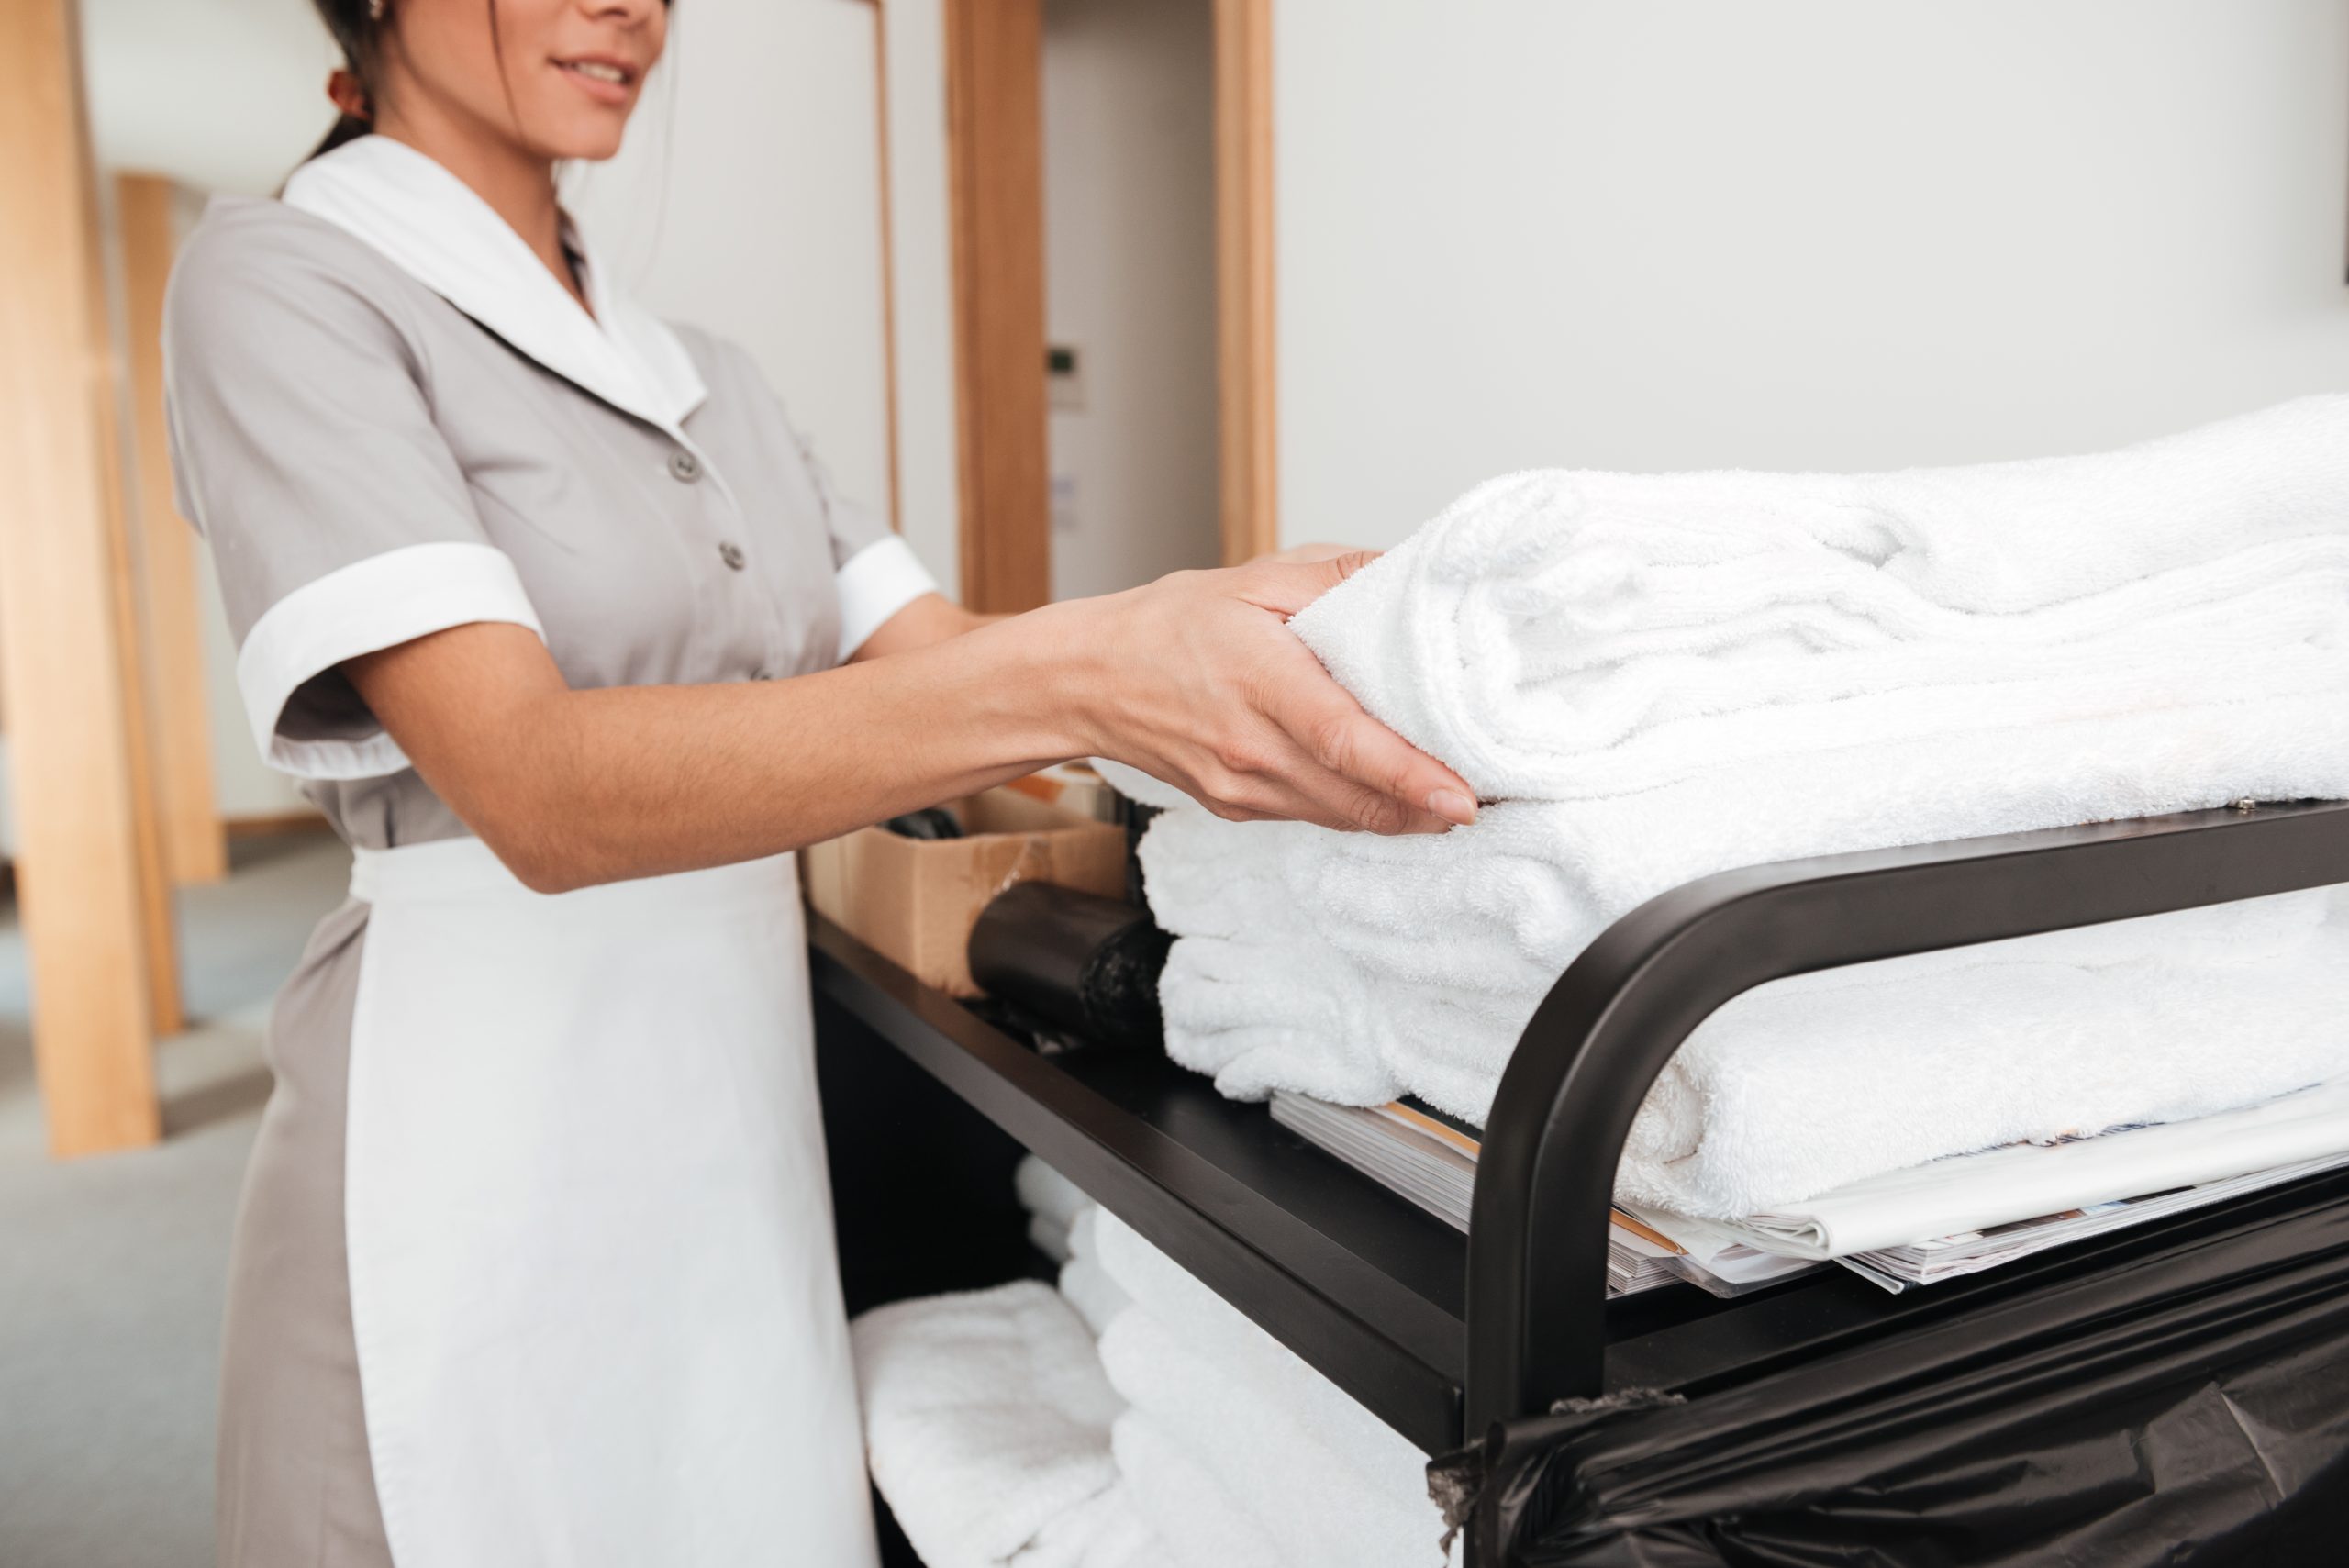 Cropped image of a smiling young maid taking fresh towels from a housekeeping cart